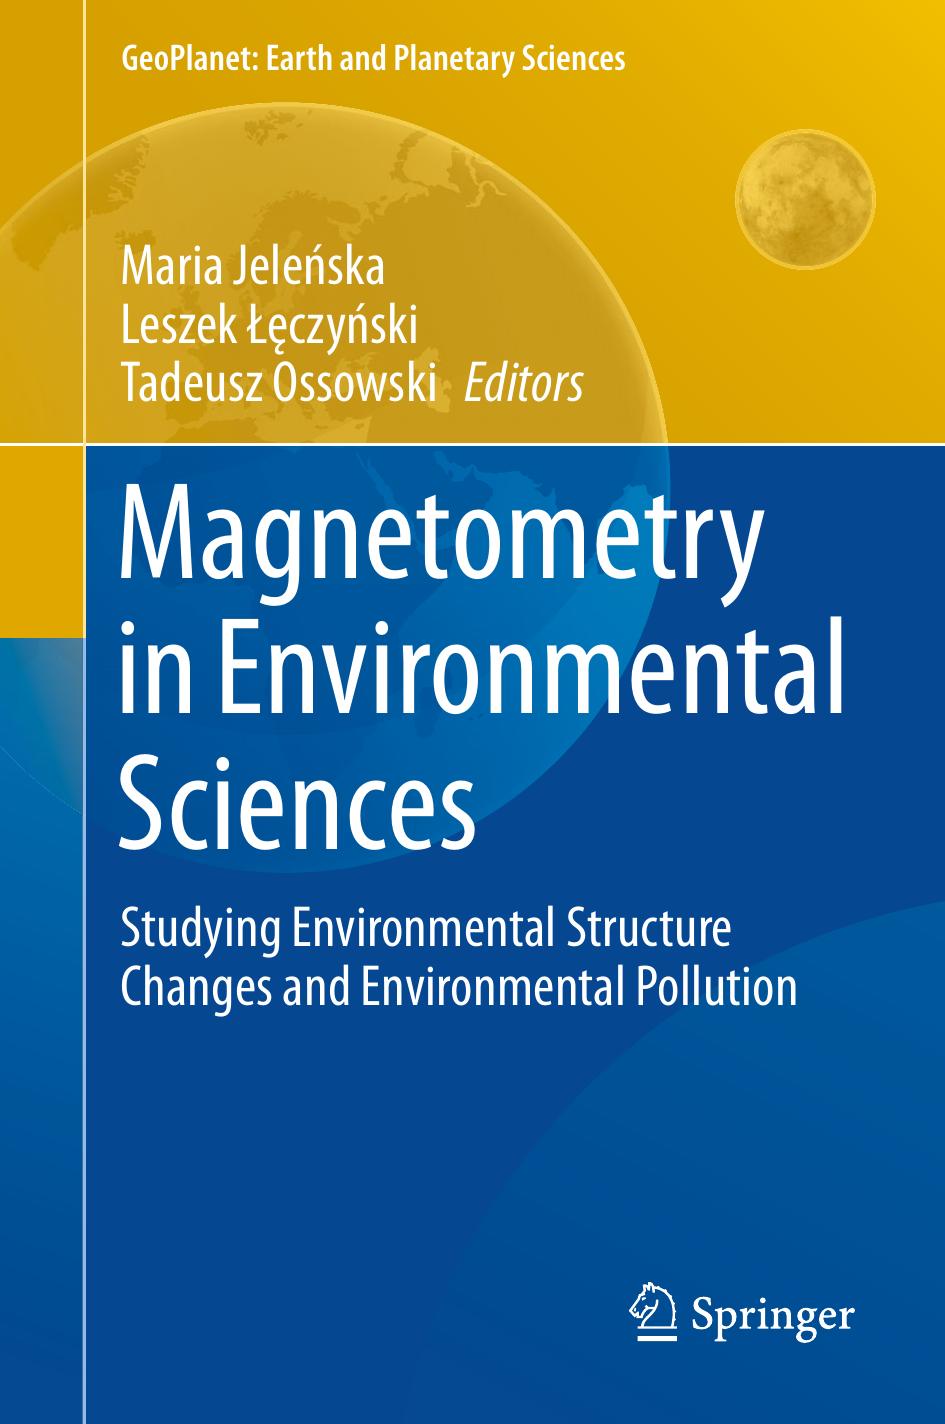 Magnetometry in environmental sciences   studying environmental structure 2018 ( PDFDrive.com )